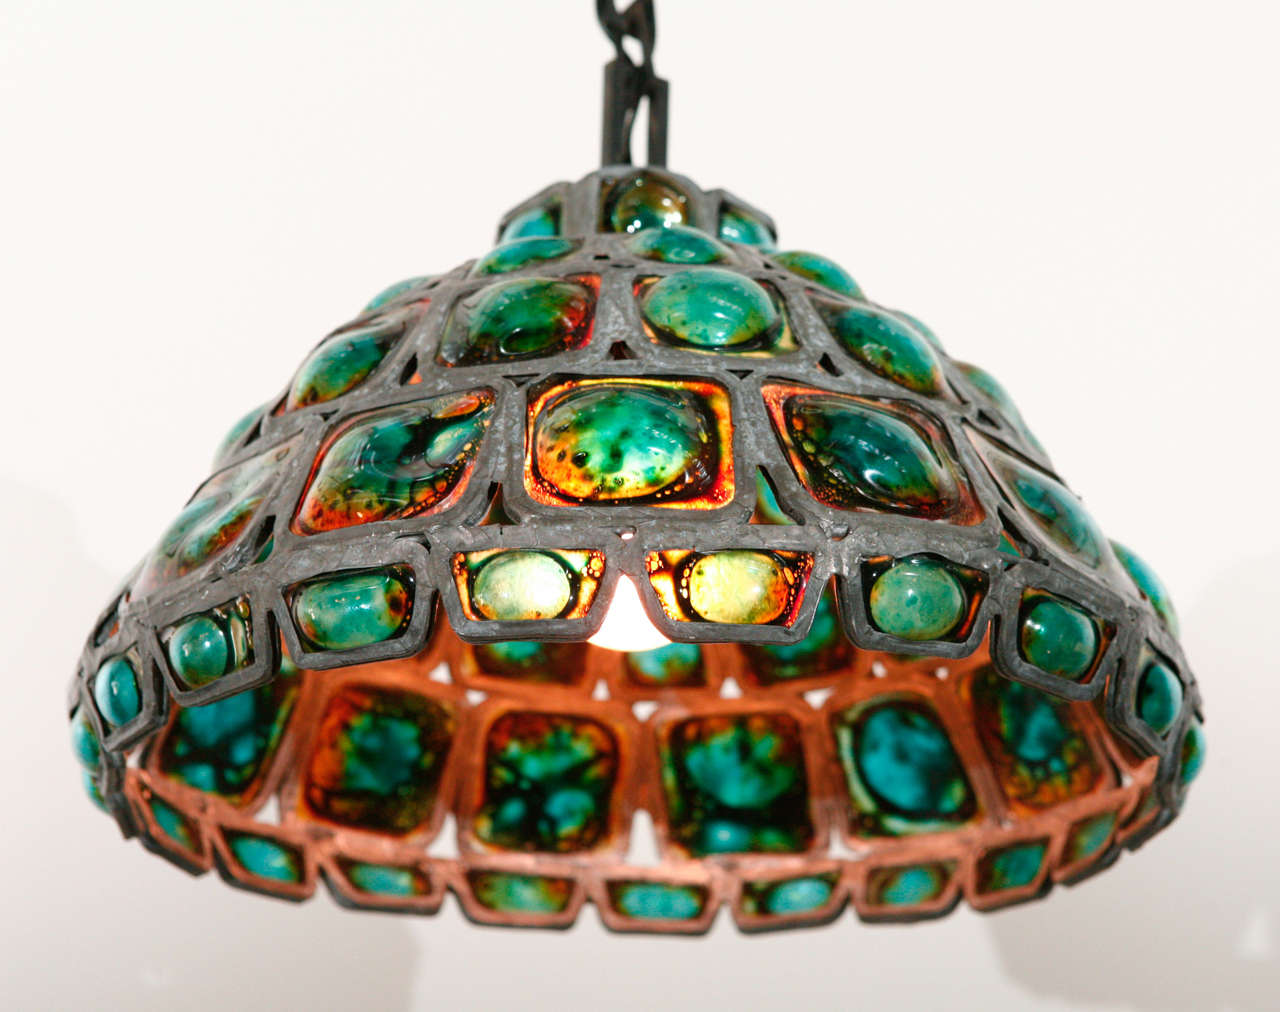 Hand blown turquoise art glass pendant with metal frame.